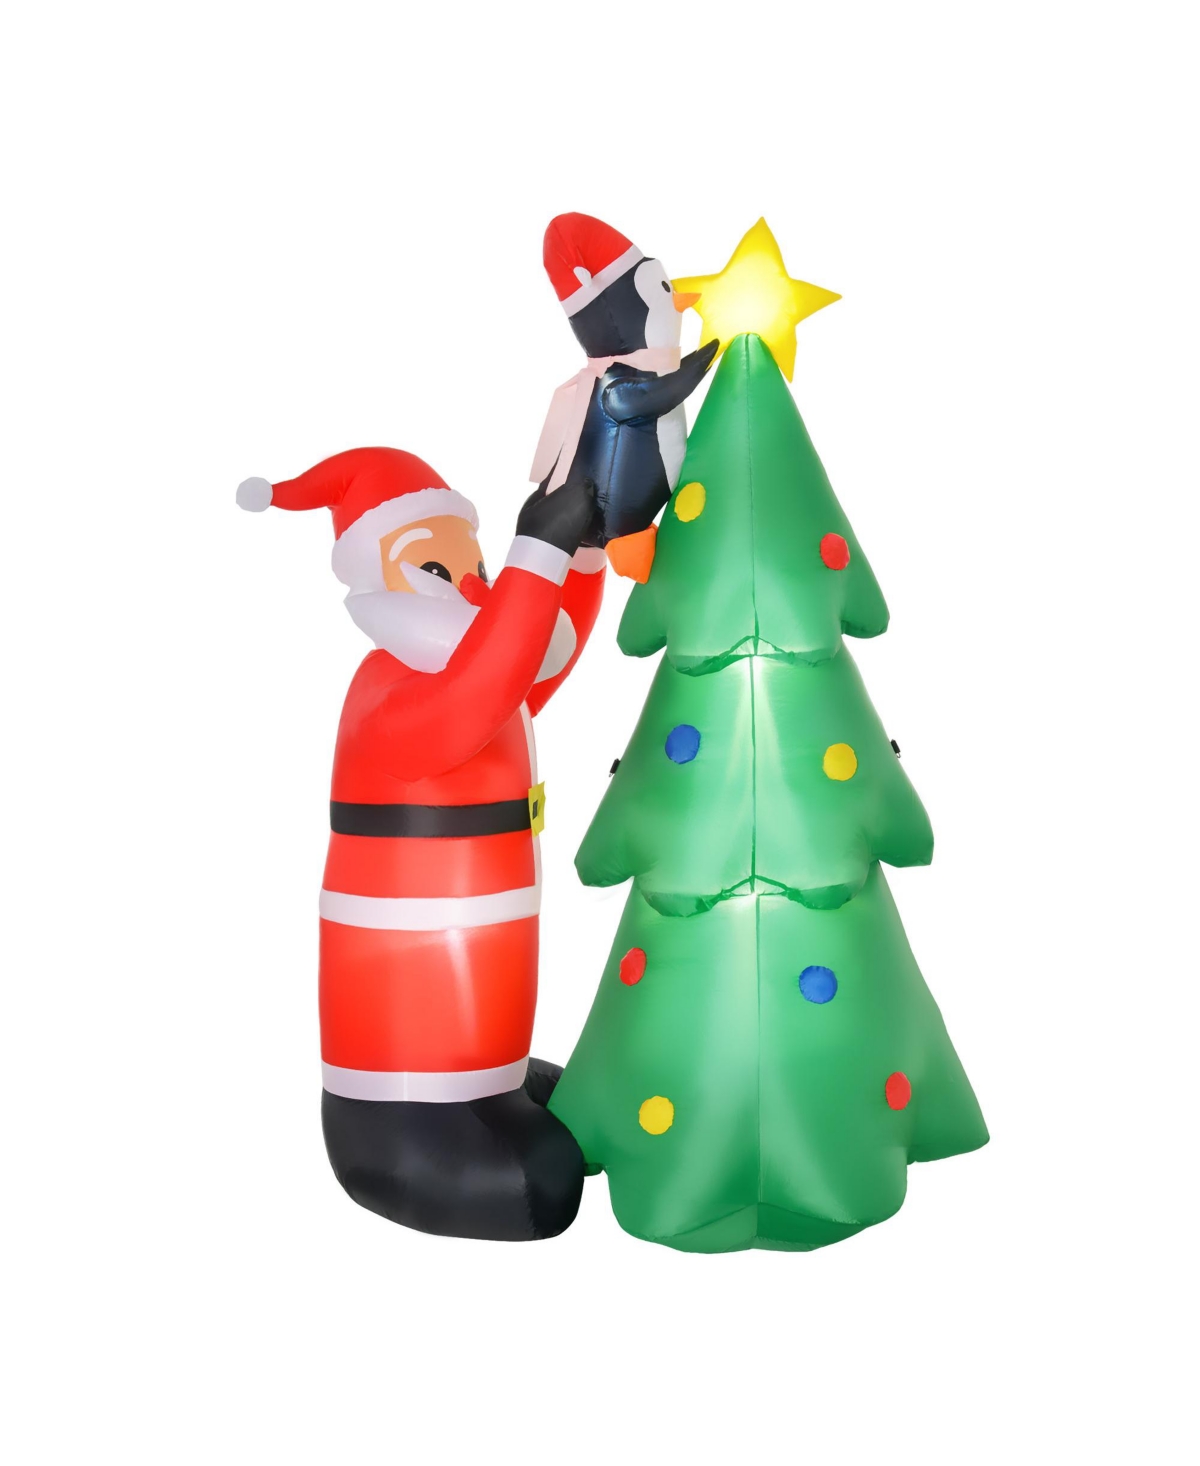 6' Christmas Inflatable Santa and Penguin Outdoor Yard Decoration - Green